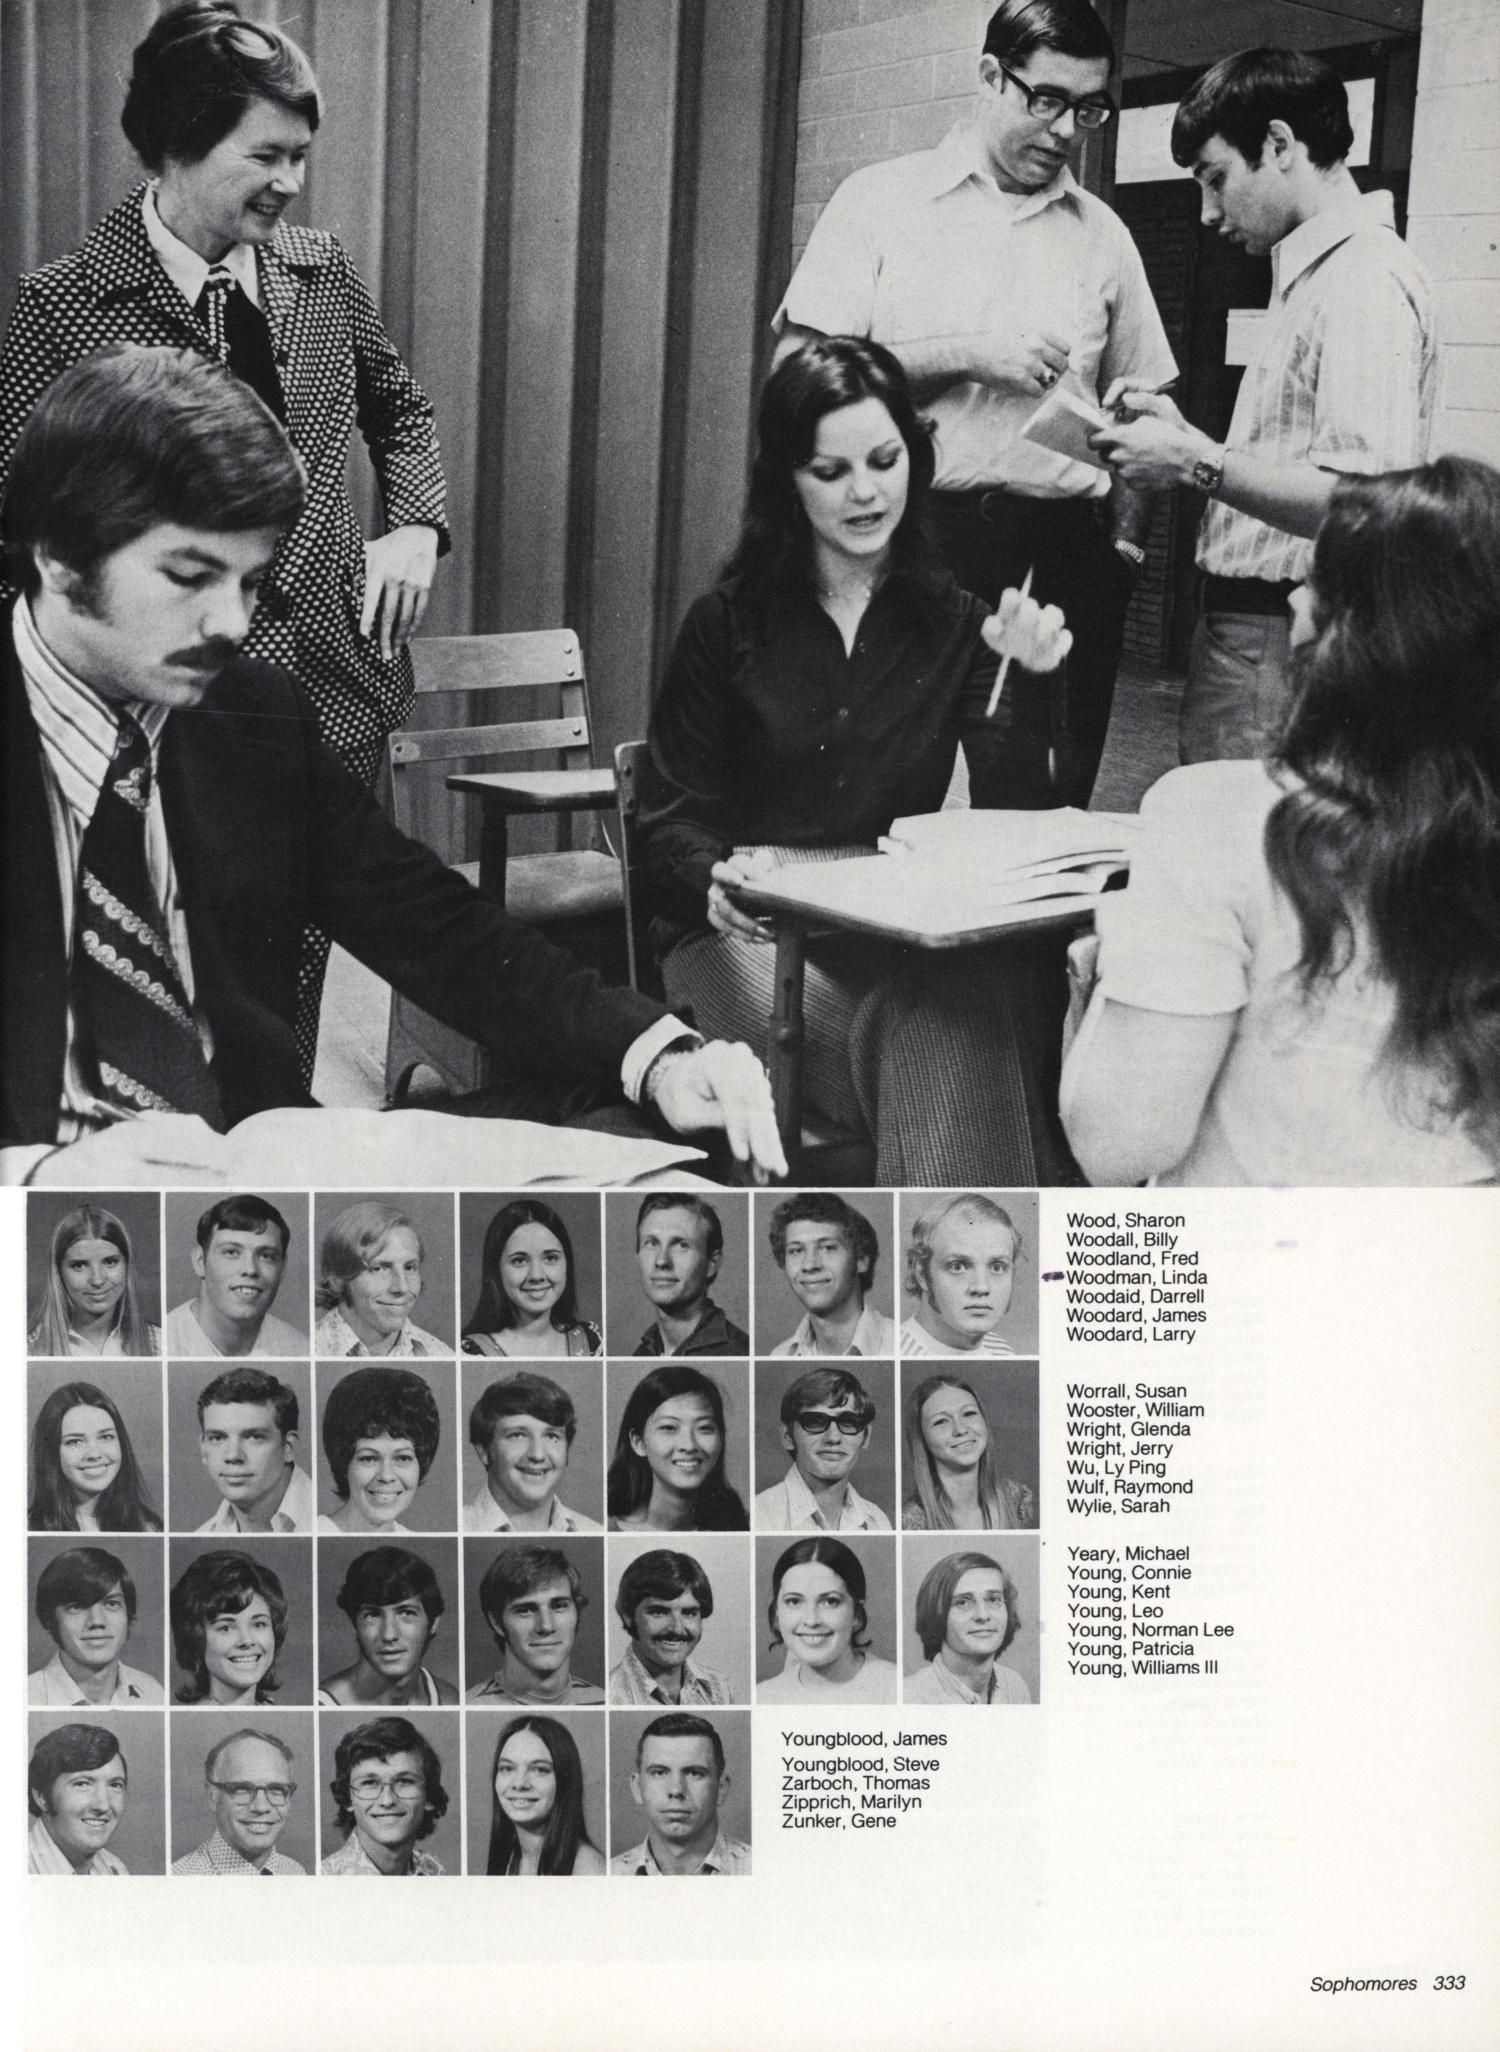 The Cardinal Yearbook Of Lamar University 1973 Page 333 The Portal To Texas History 8409